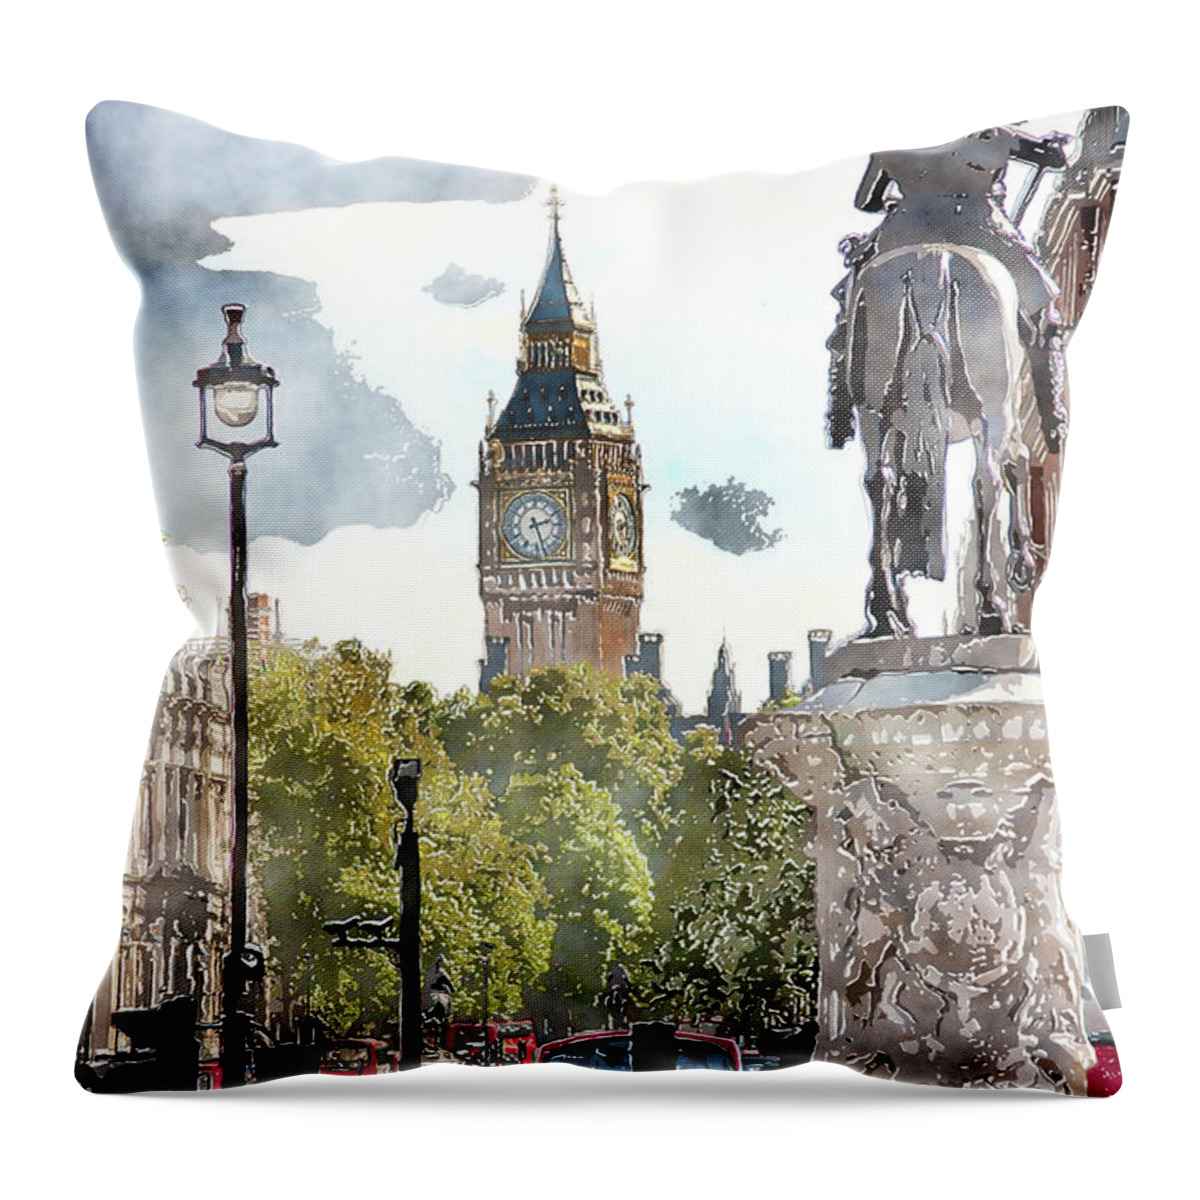 Big Ben Throw Pillow featuring the digital art Big Ben and King George by SnapHappy Photos